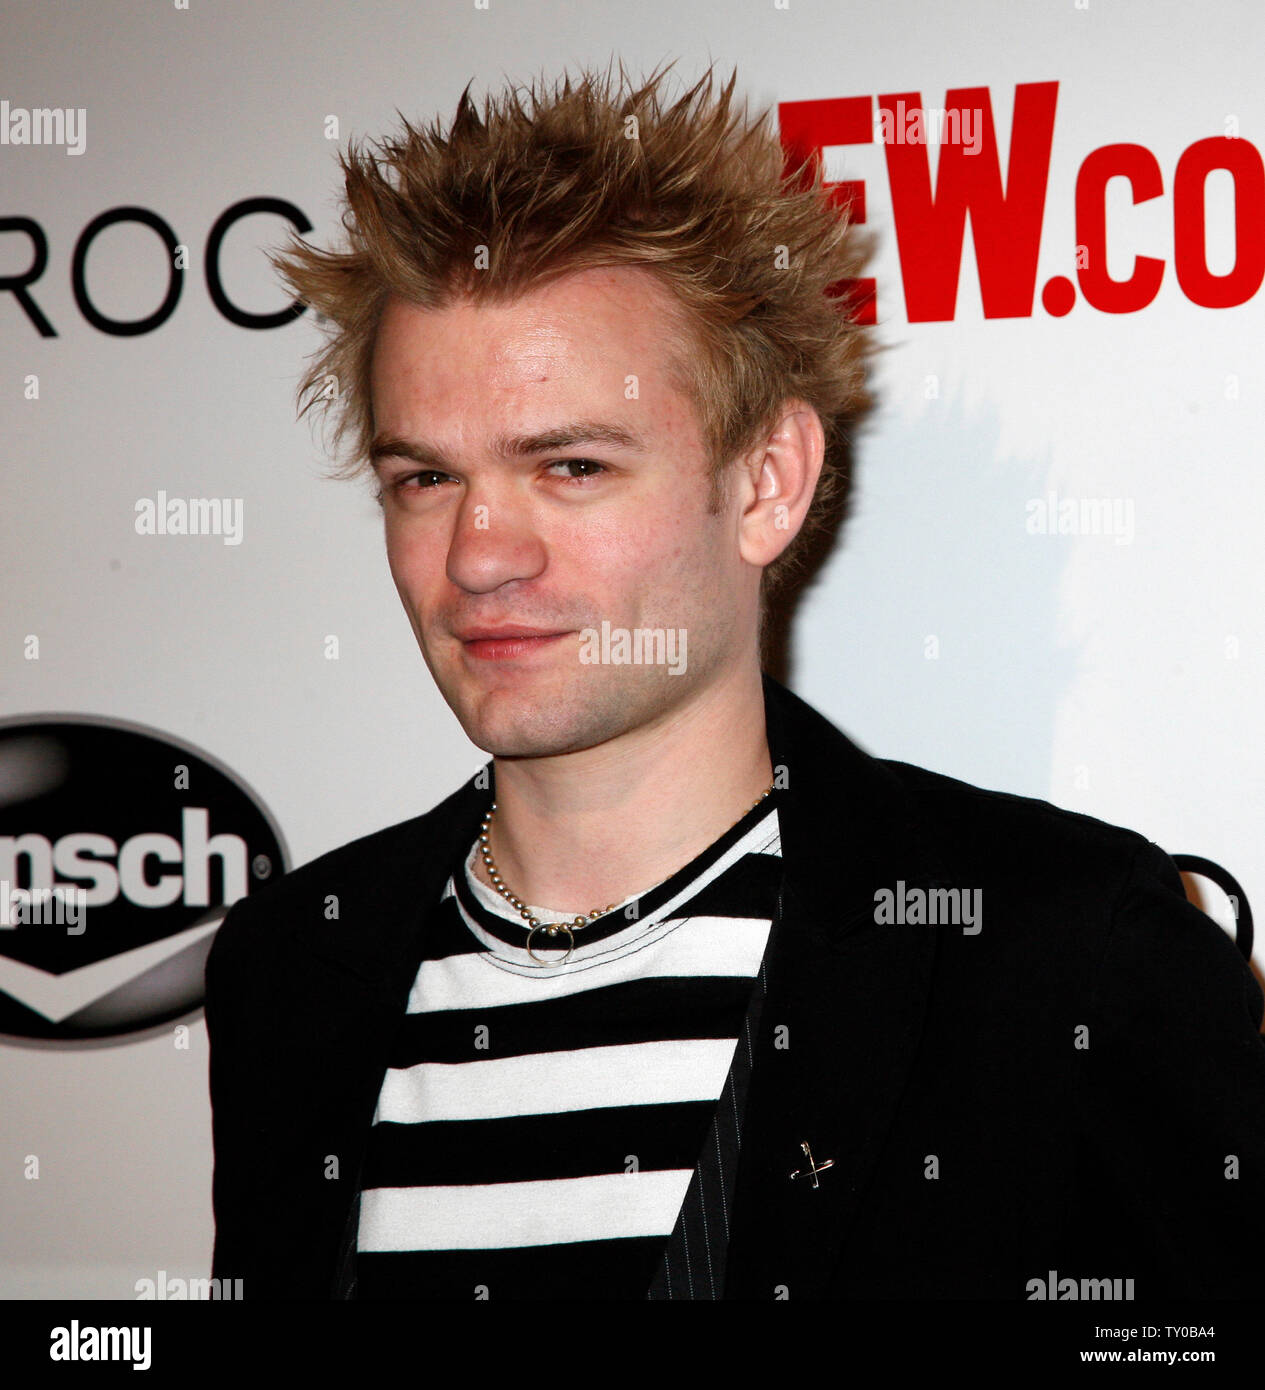 Sum 41 singer Deryck Whibley arrives for the Entertainment Weekly Grammy  after-party in West Hollywood, California on February 10, 2008. (UPI  Photo/David Silpa Stock Photo - Alamy